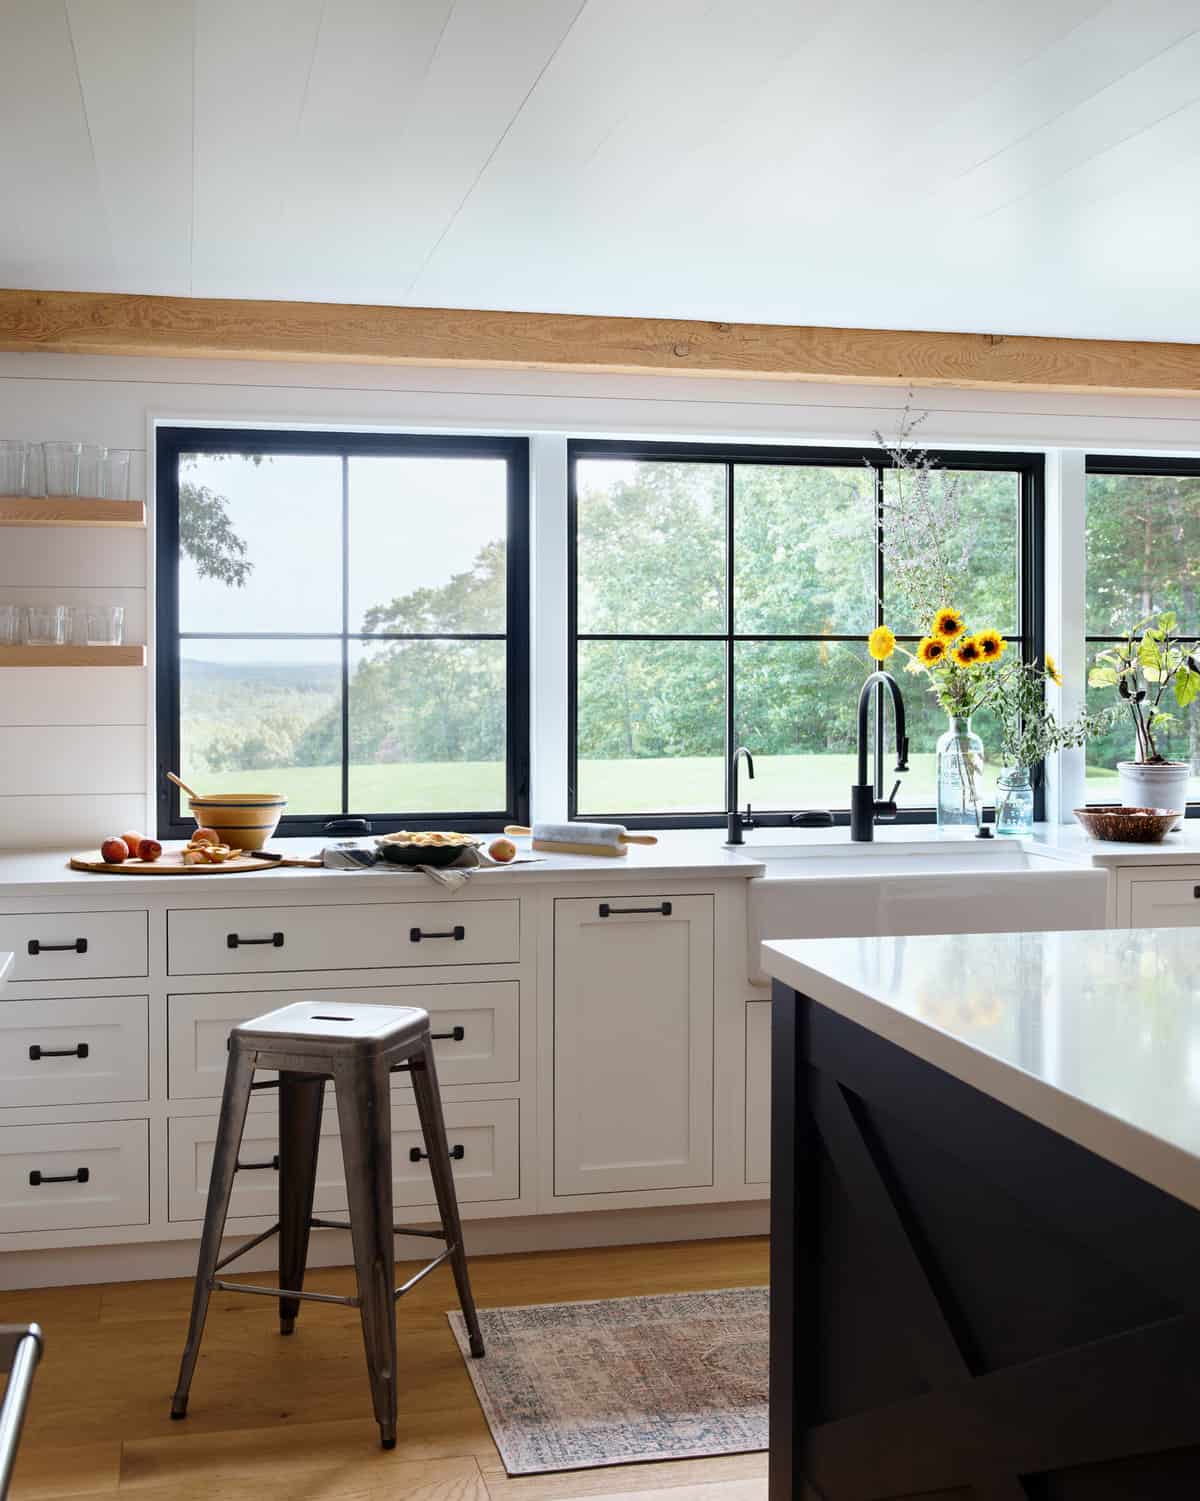 Counters were extended to the sill of the new windows, allowing for taller windows and more of a connection to the outdoors.